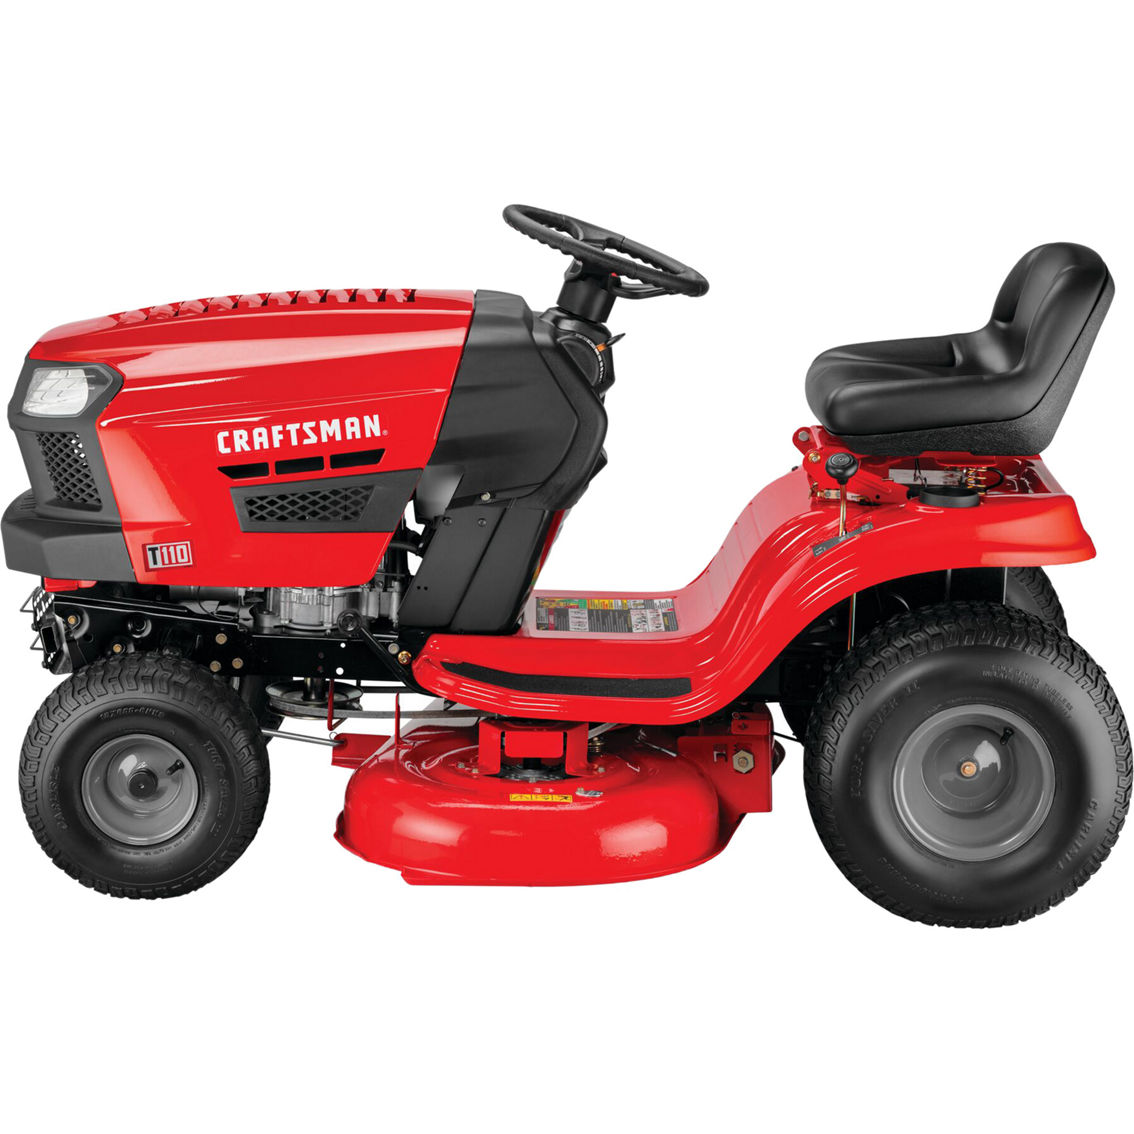 Craftsman 42-in. 17.5 HP Gas Riding Mower - Image 2 of 5